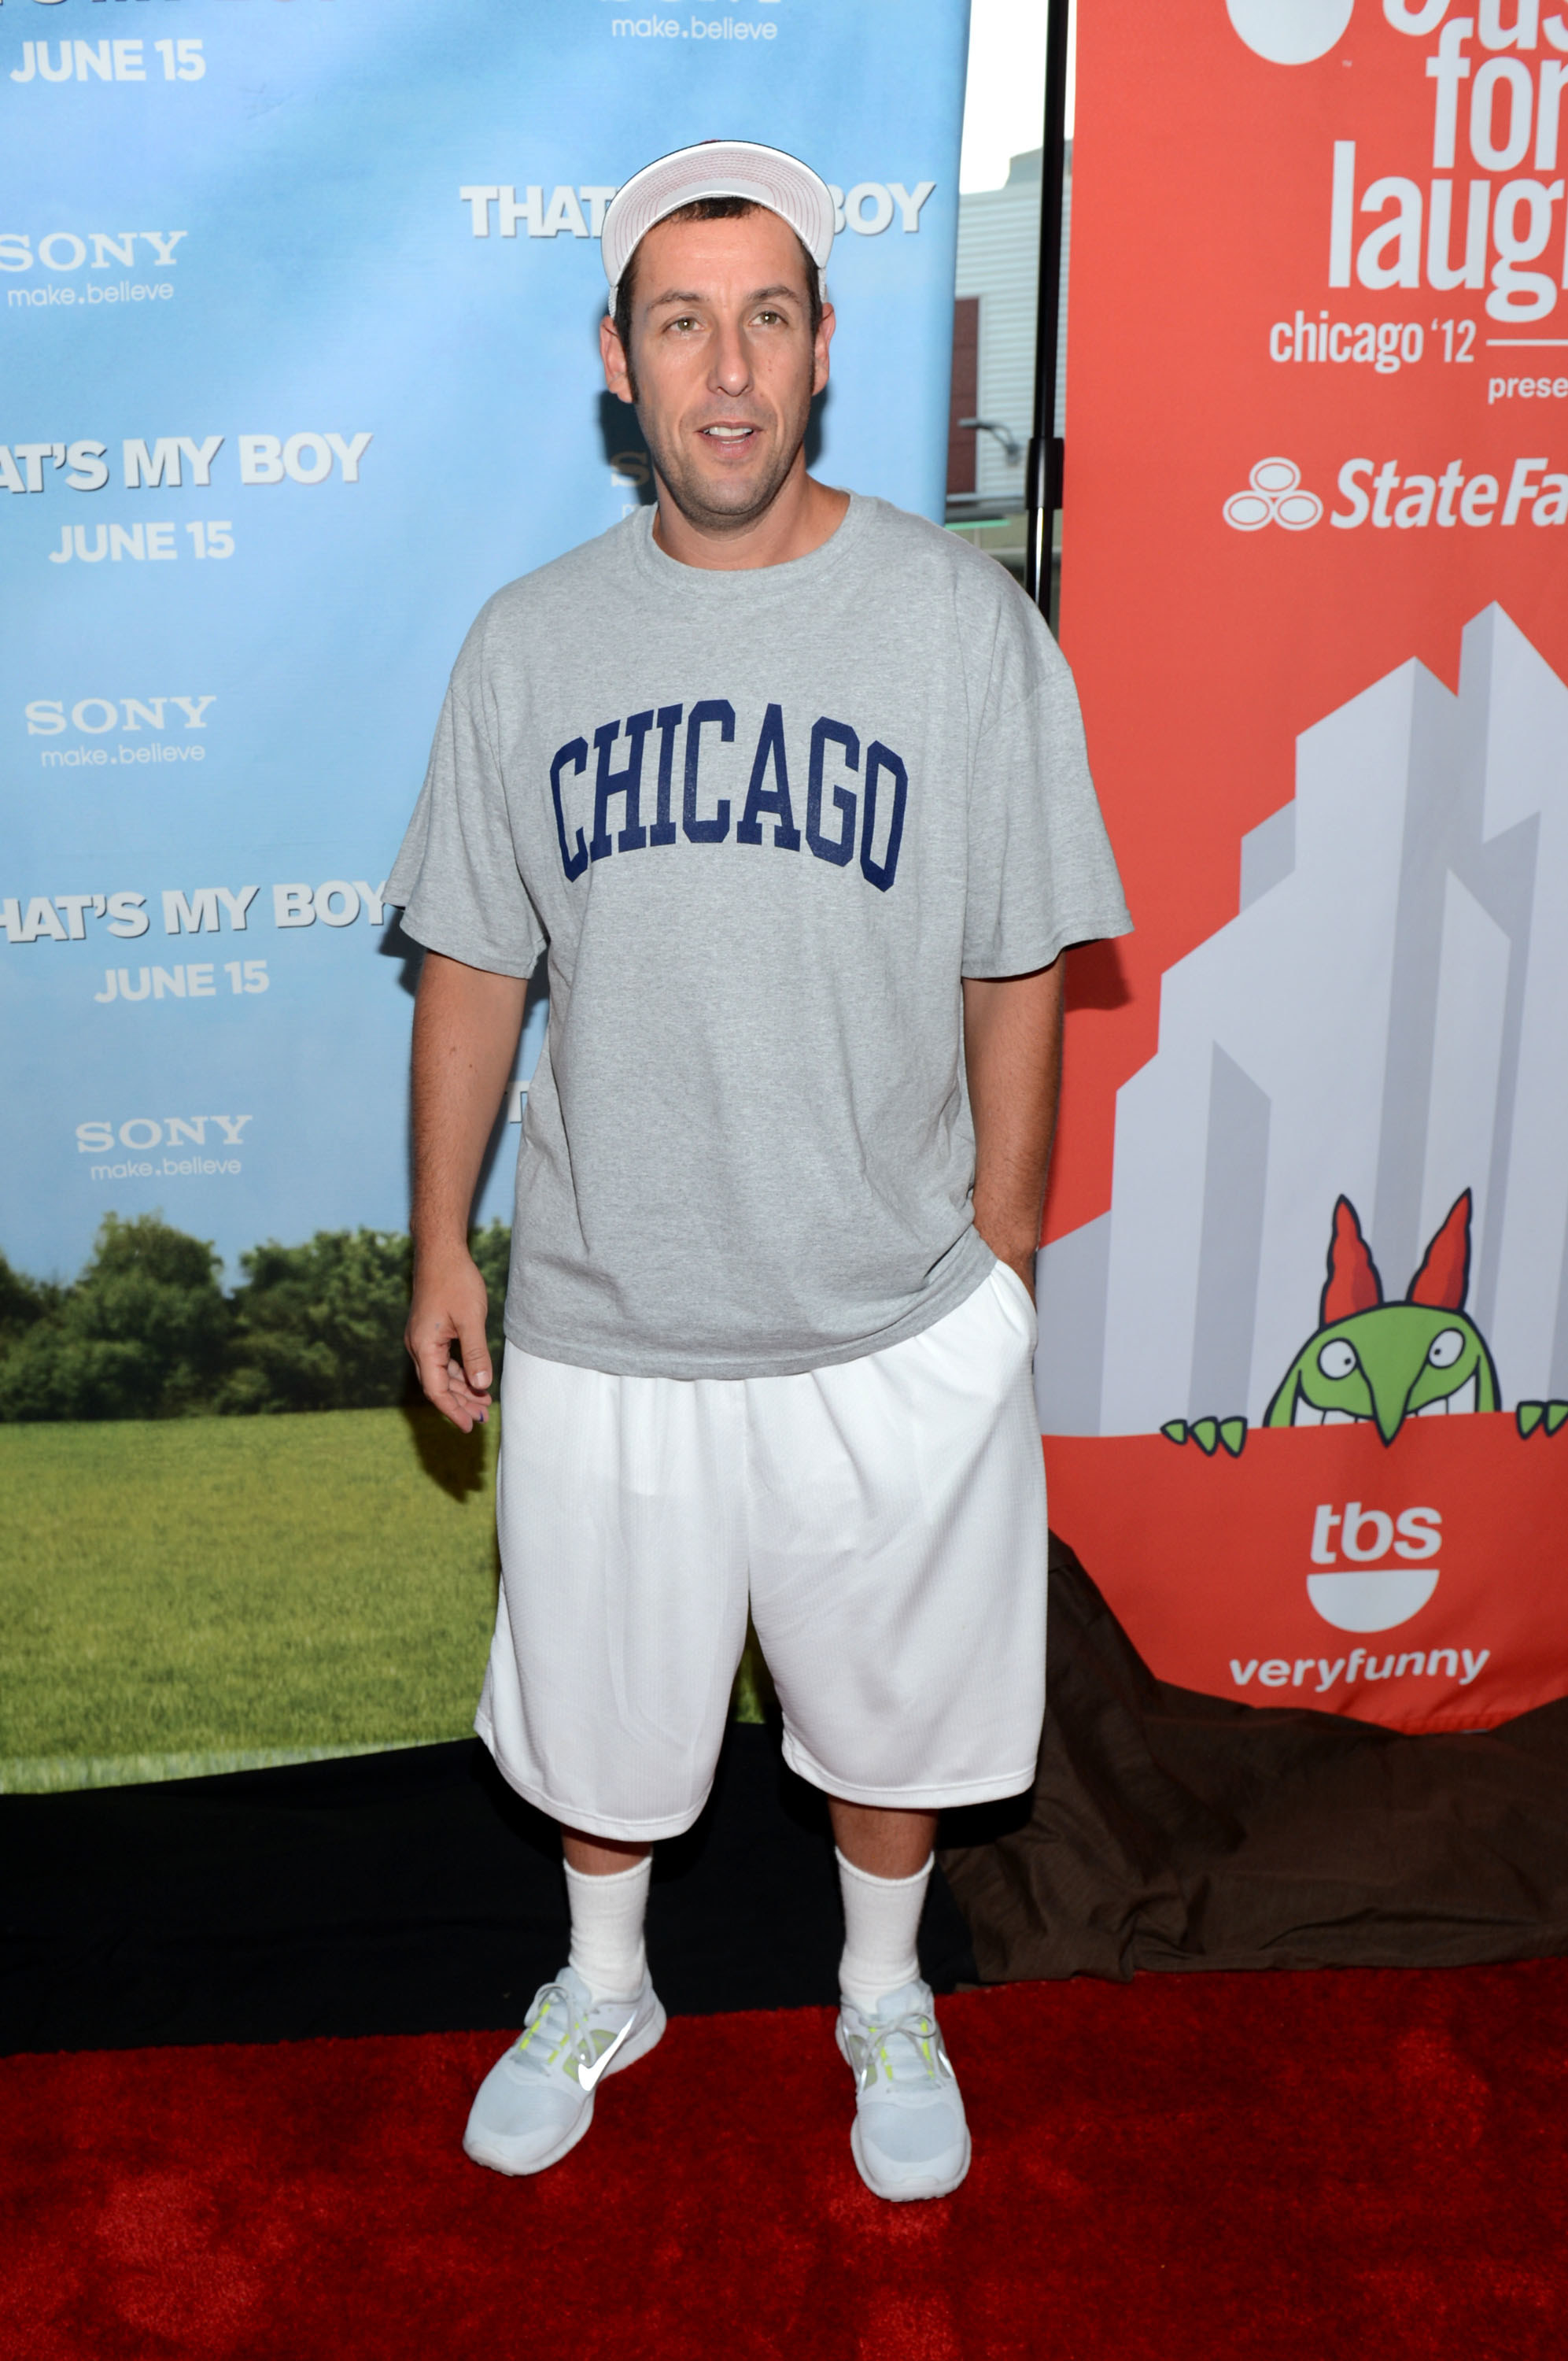 The shorts and long and baggy, the T-shirt is a Chicago tee, and he&#x27;s wearing a cap